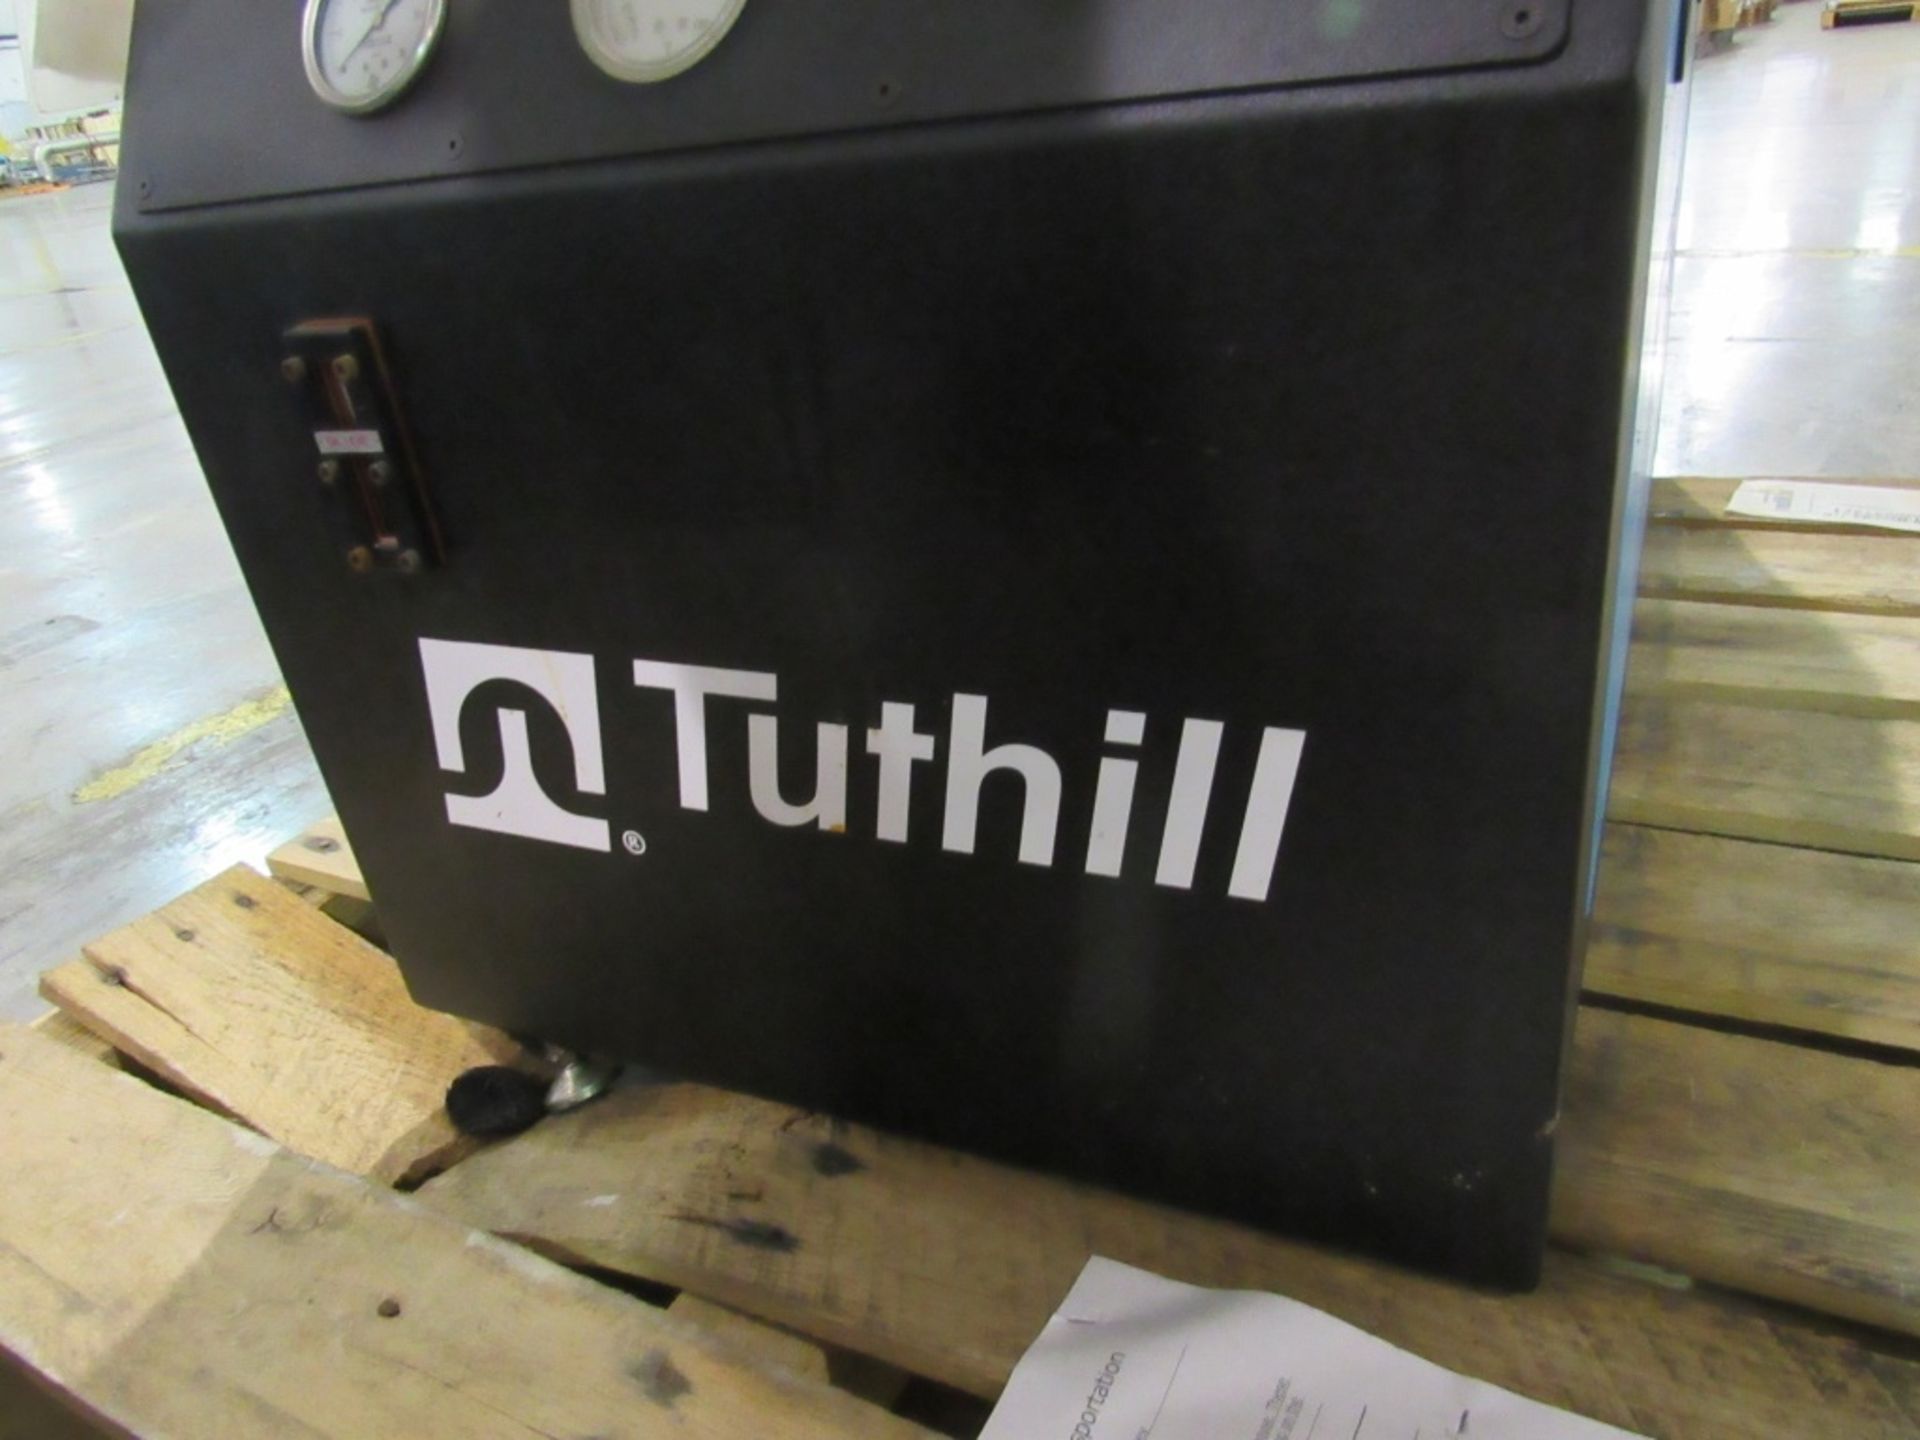 Tuthill KDS 425 Screw Vacuum Pump- ***Located in Cleveland, TN*** MFR - Tuthill Model - KDS 425 - Image 3 of 8